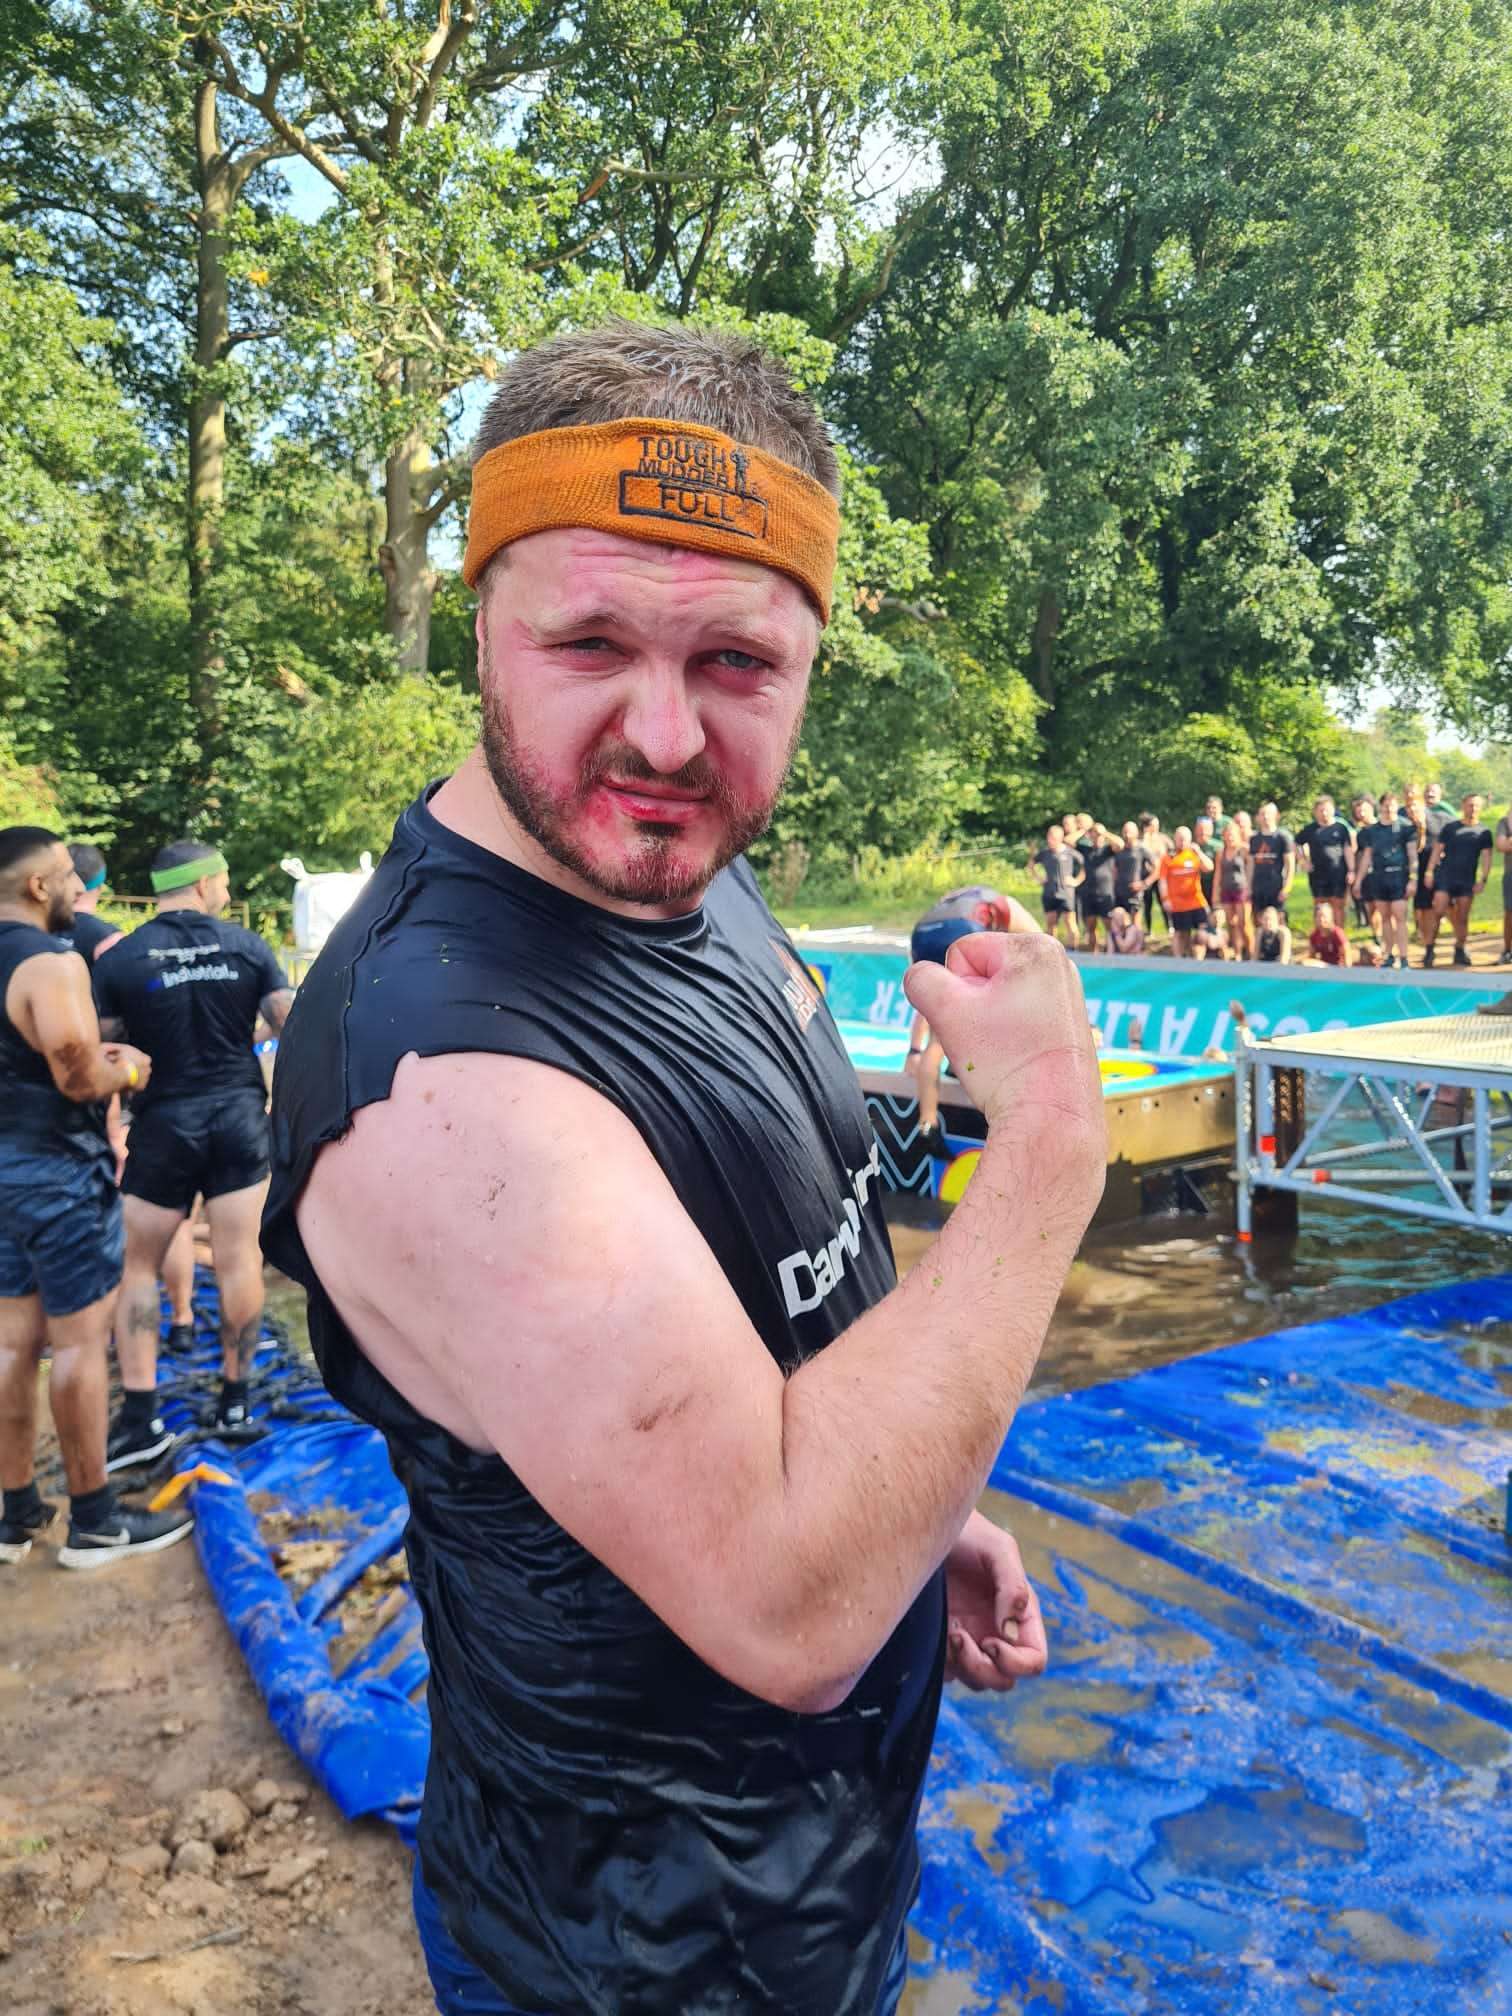 A Darwin Group employee in the middle of doing the Tough Mudder challenge. He is posing for the camera. In the background there is part of the obstacle course and a line of trees.